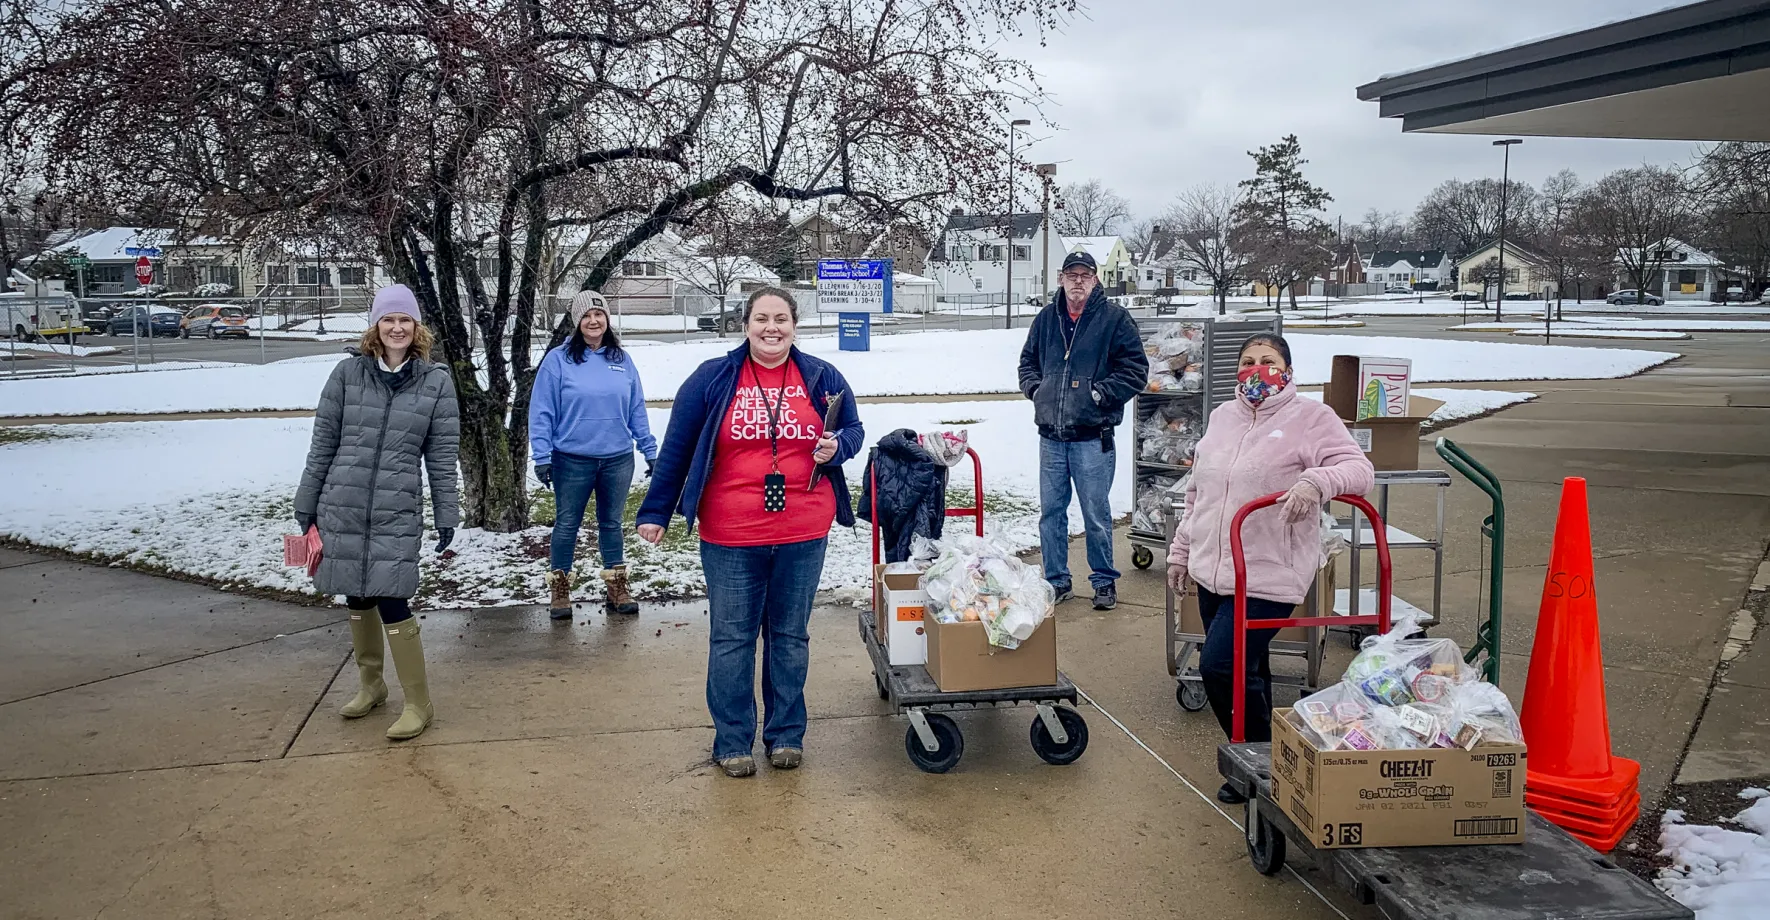 Food service staff pose outside in the snow, ready with carts of food to feed kids.